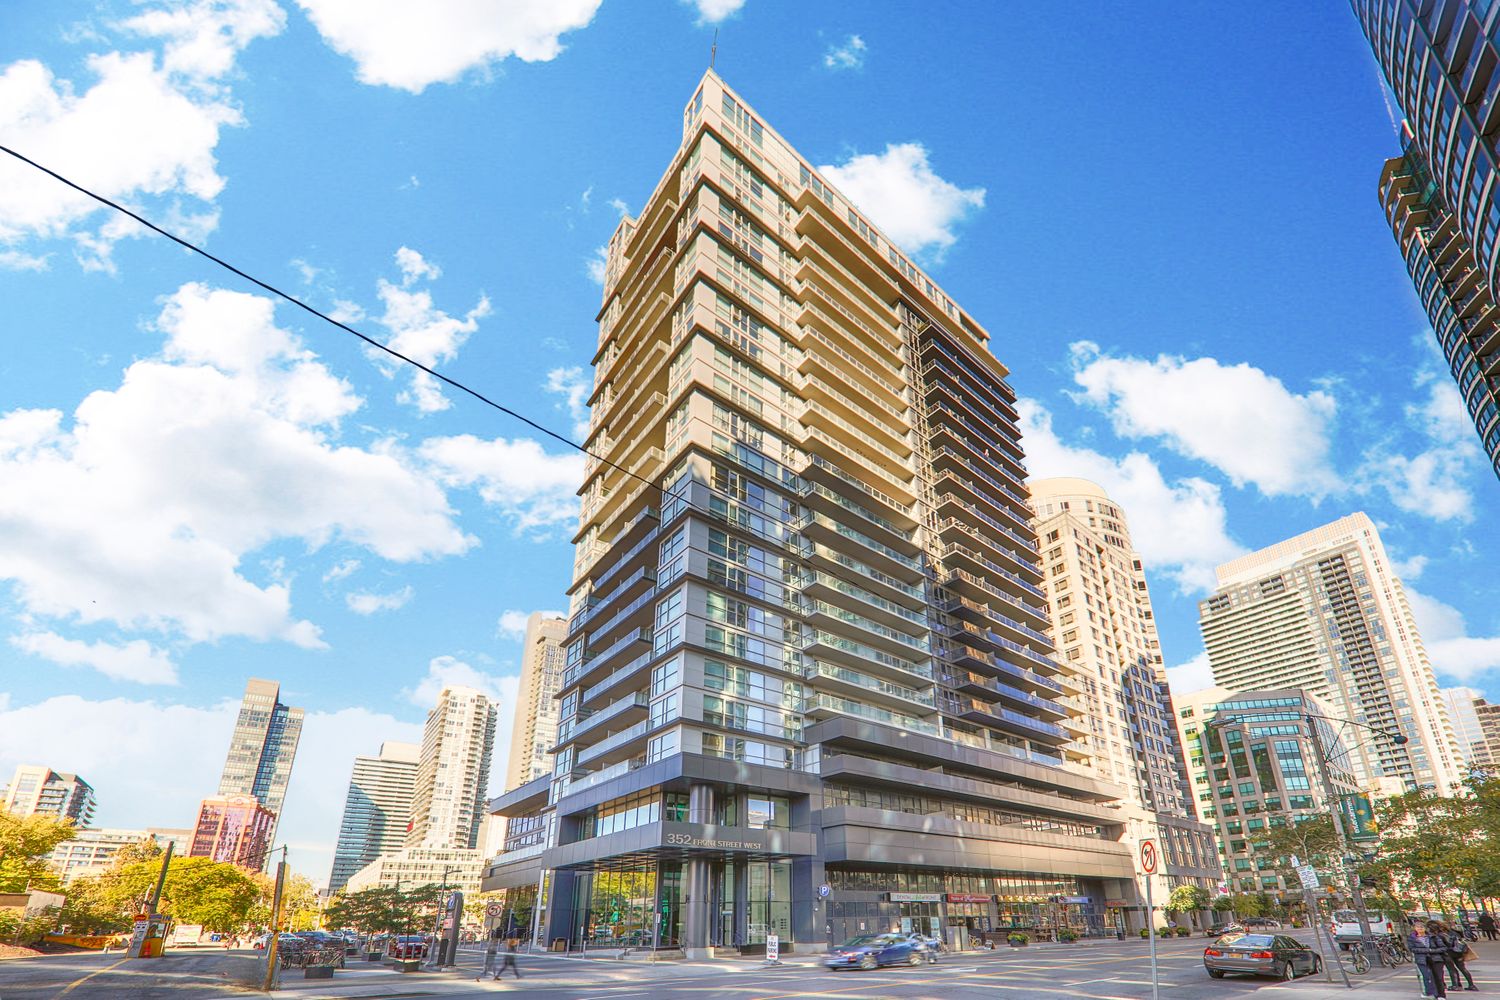 352 Front Street W. FLY Condos is located in  Downtown, Toronto - image #1 of 4